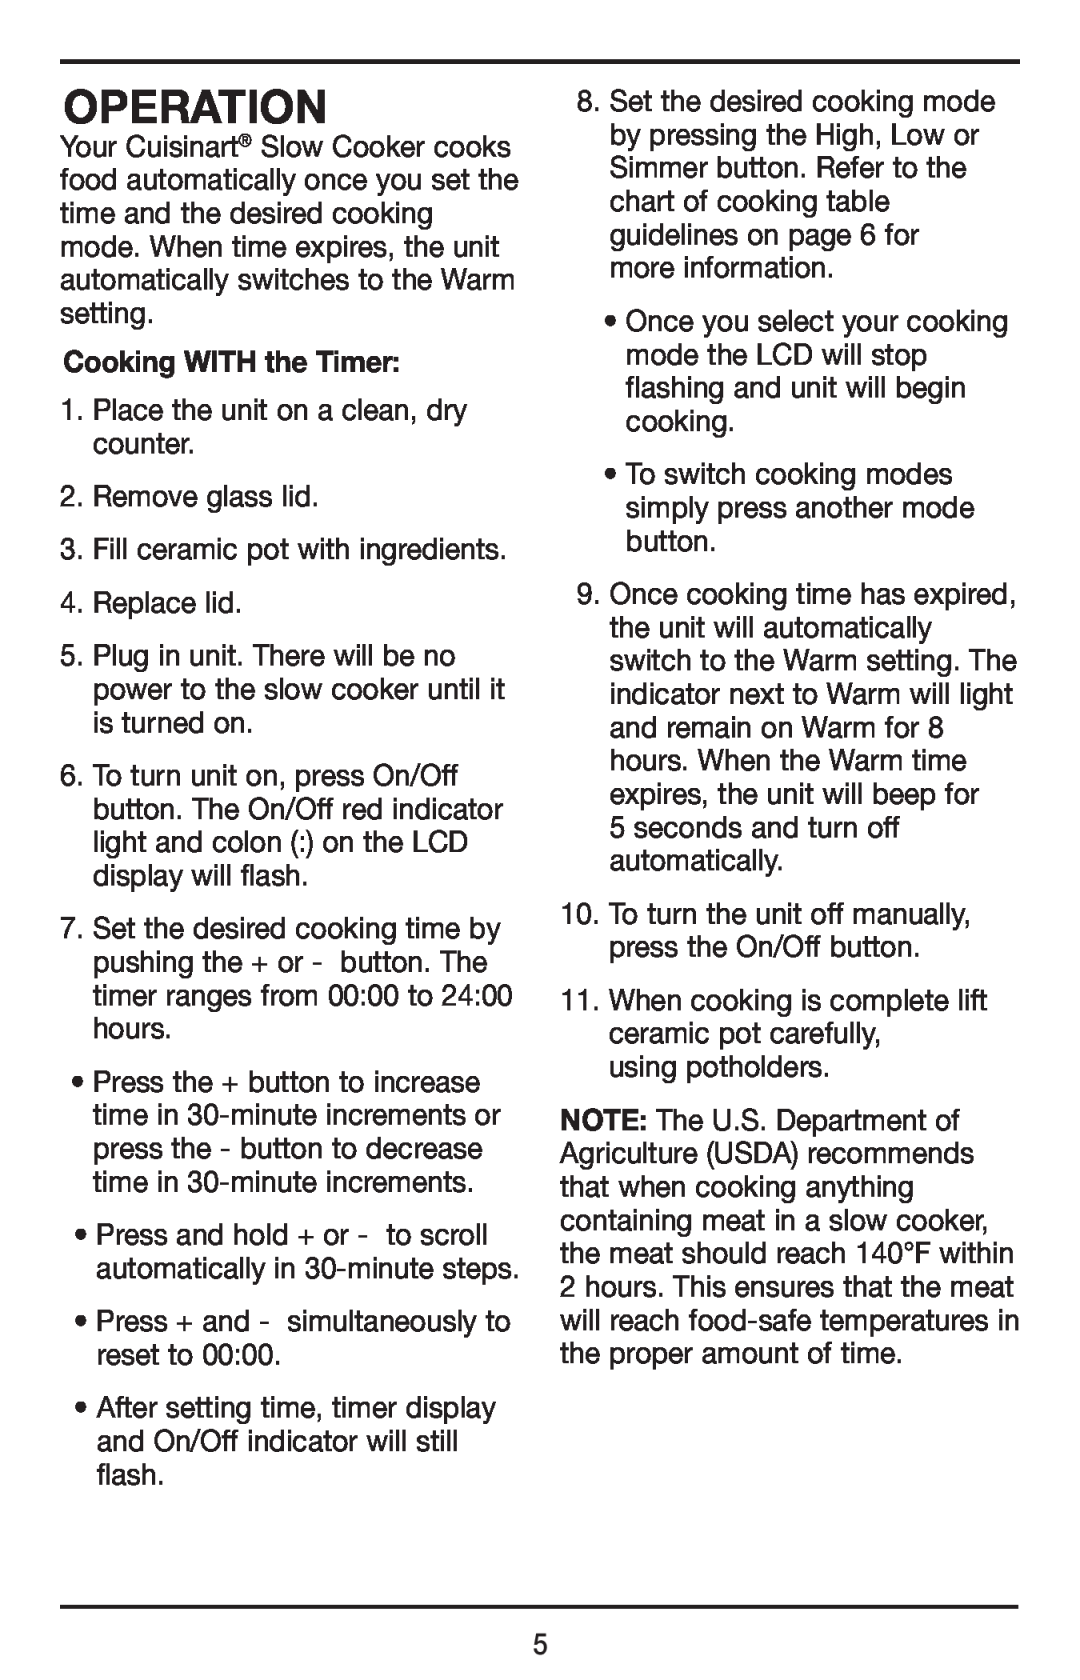 Cuisinart PSC-350 manual Operation, Cooking WITH the Timer 